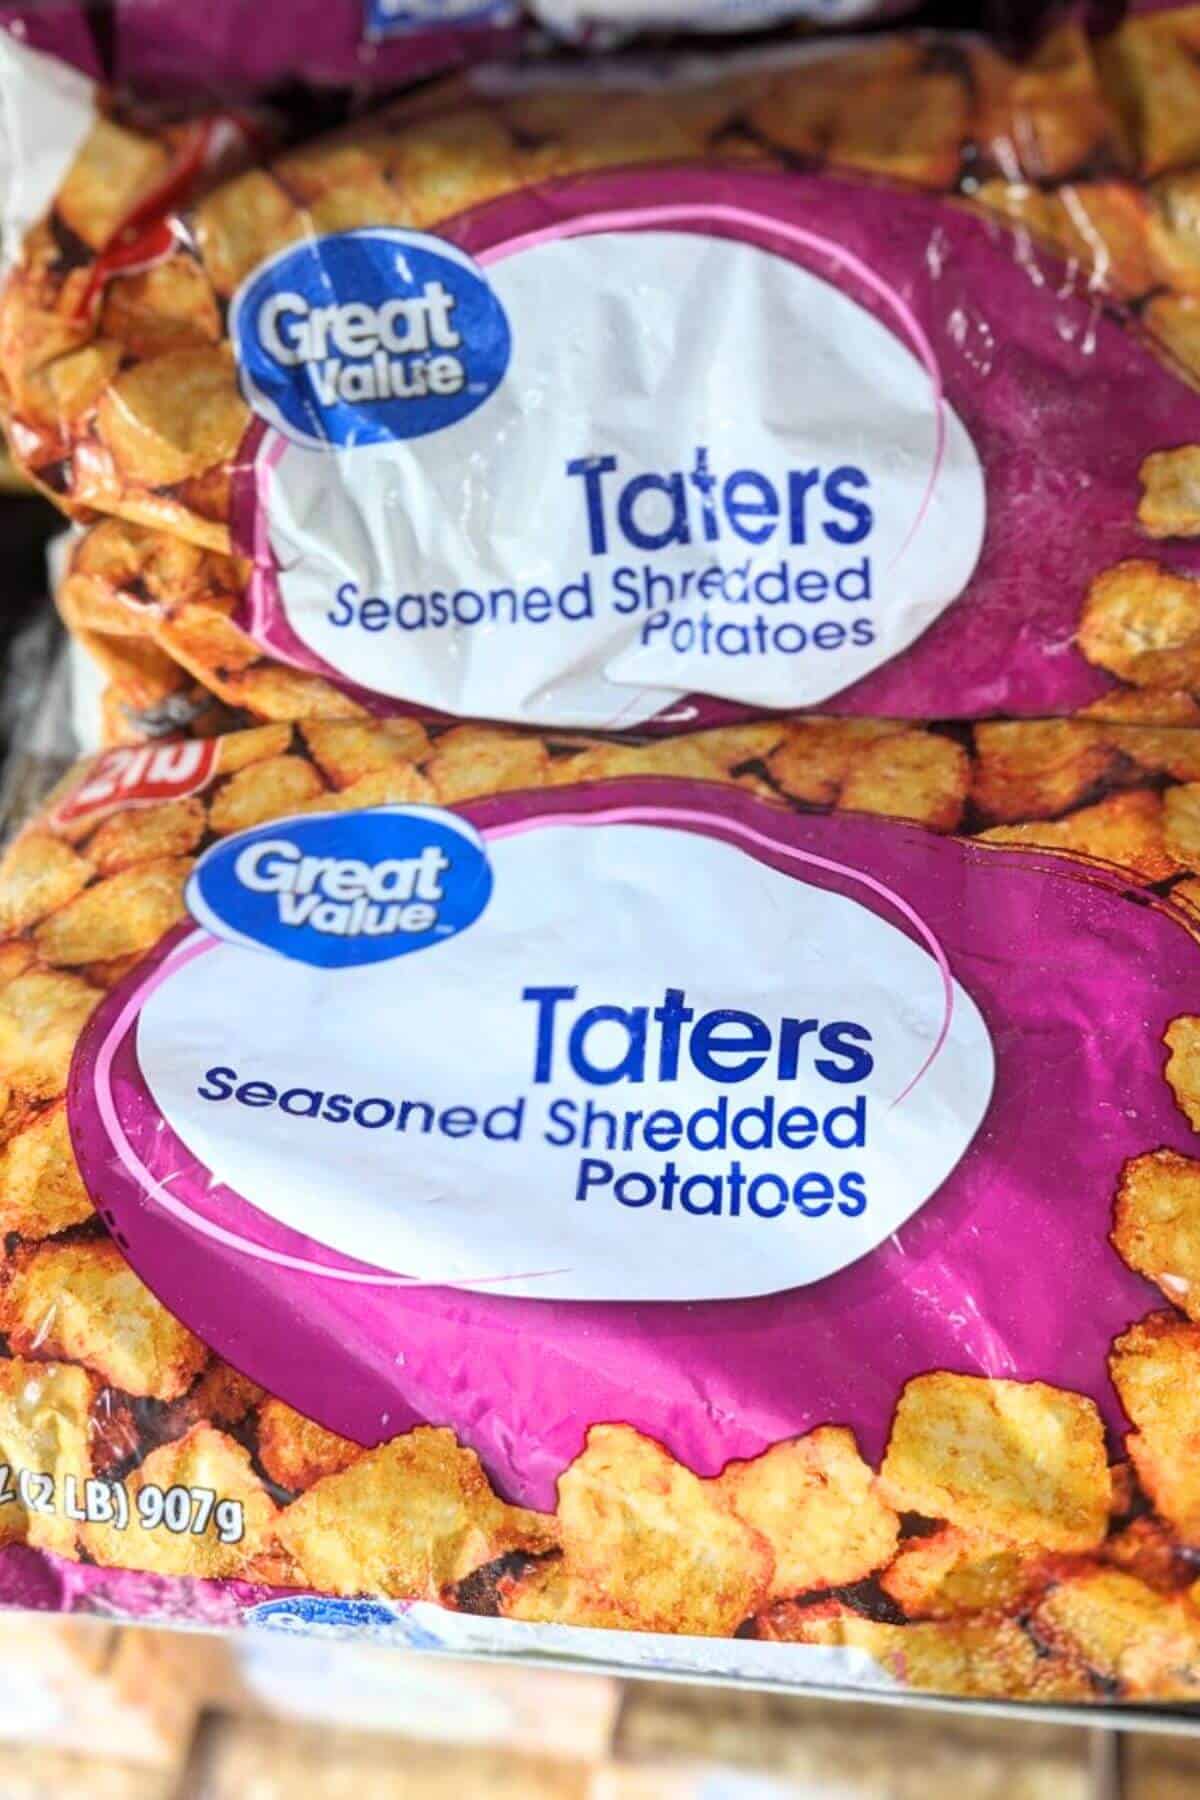 Two bags of frozen great value tater tots.